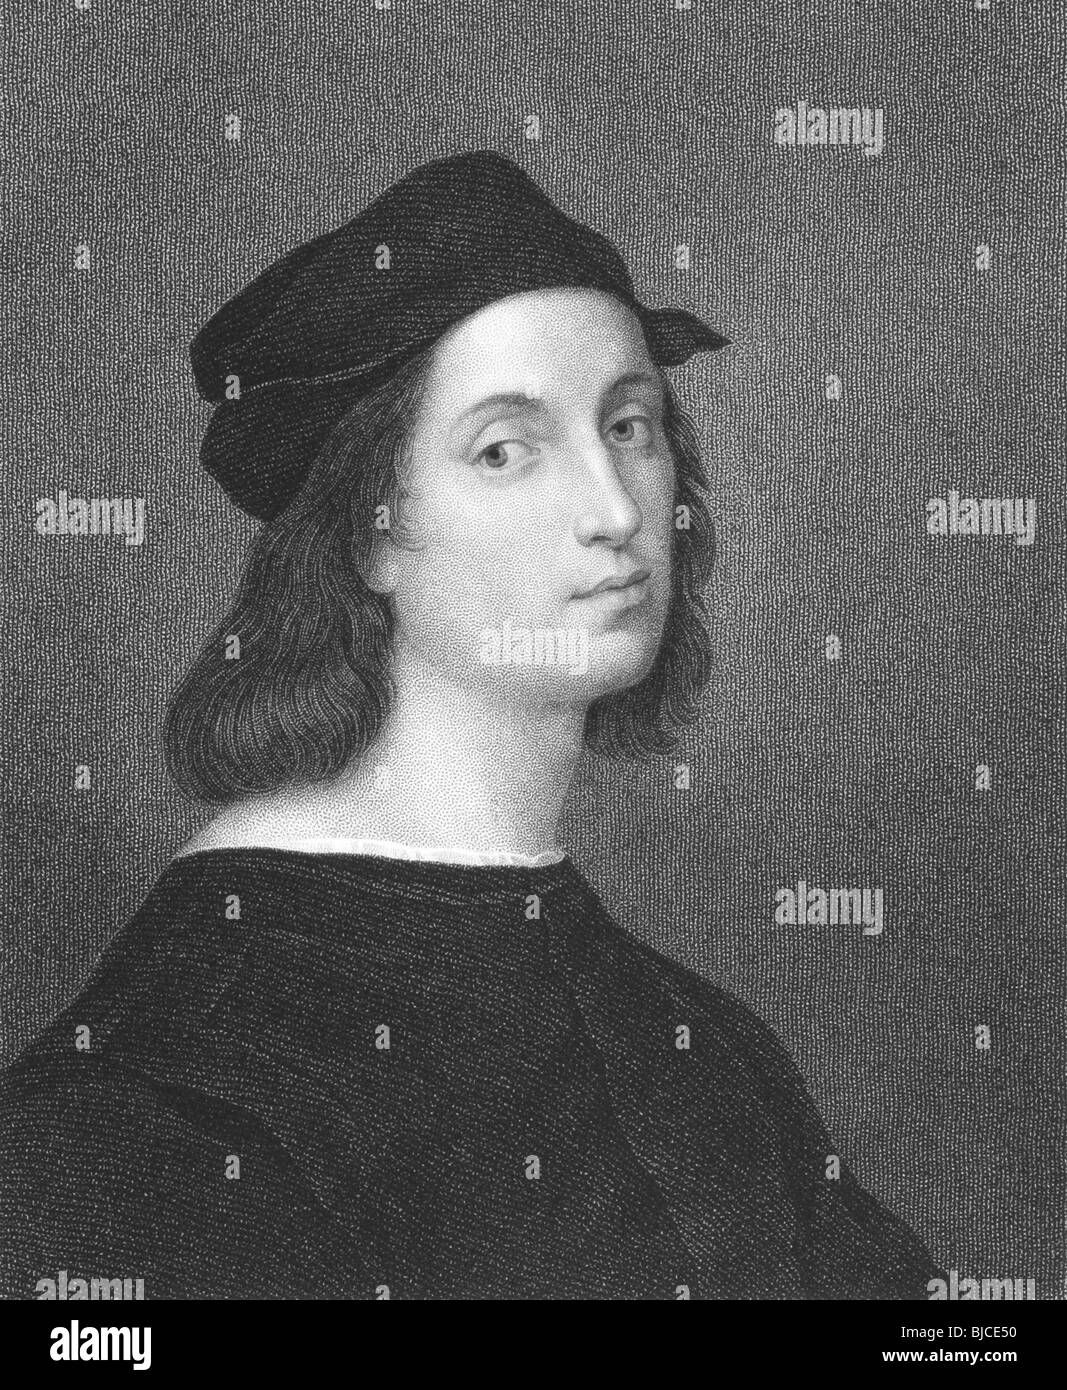 Raphael (1483-1520) on engraving from the 1800s. Italian painter and architect of the High Renaissance. Stock Photo